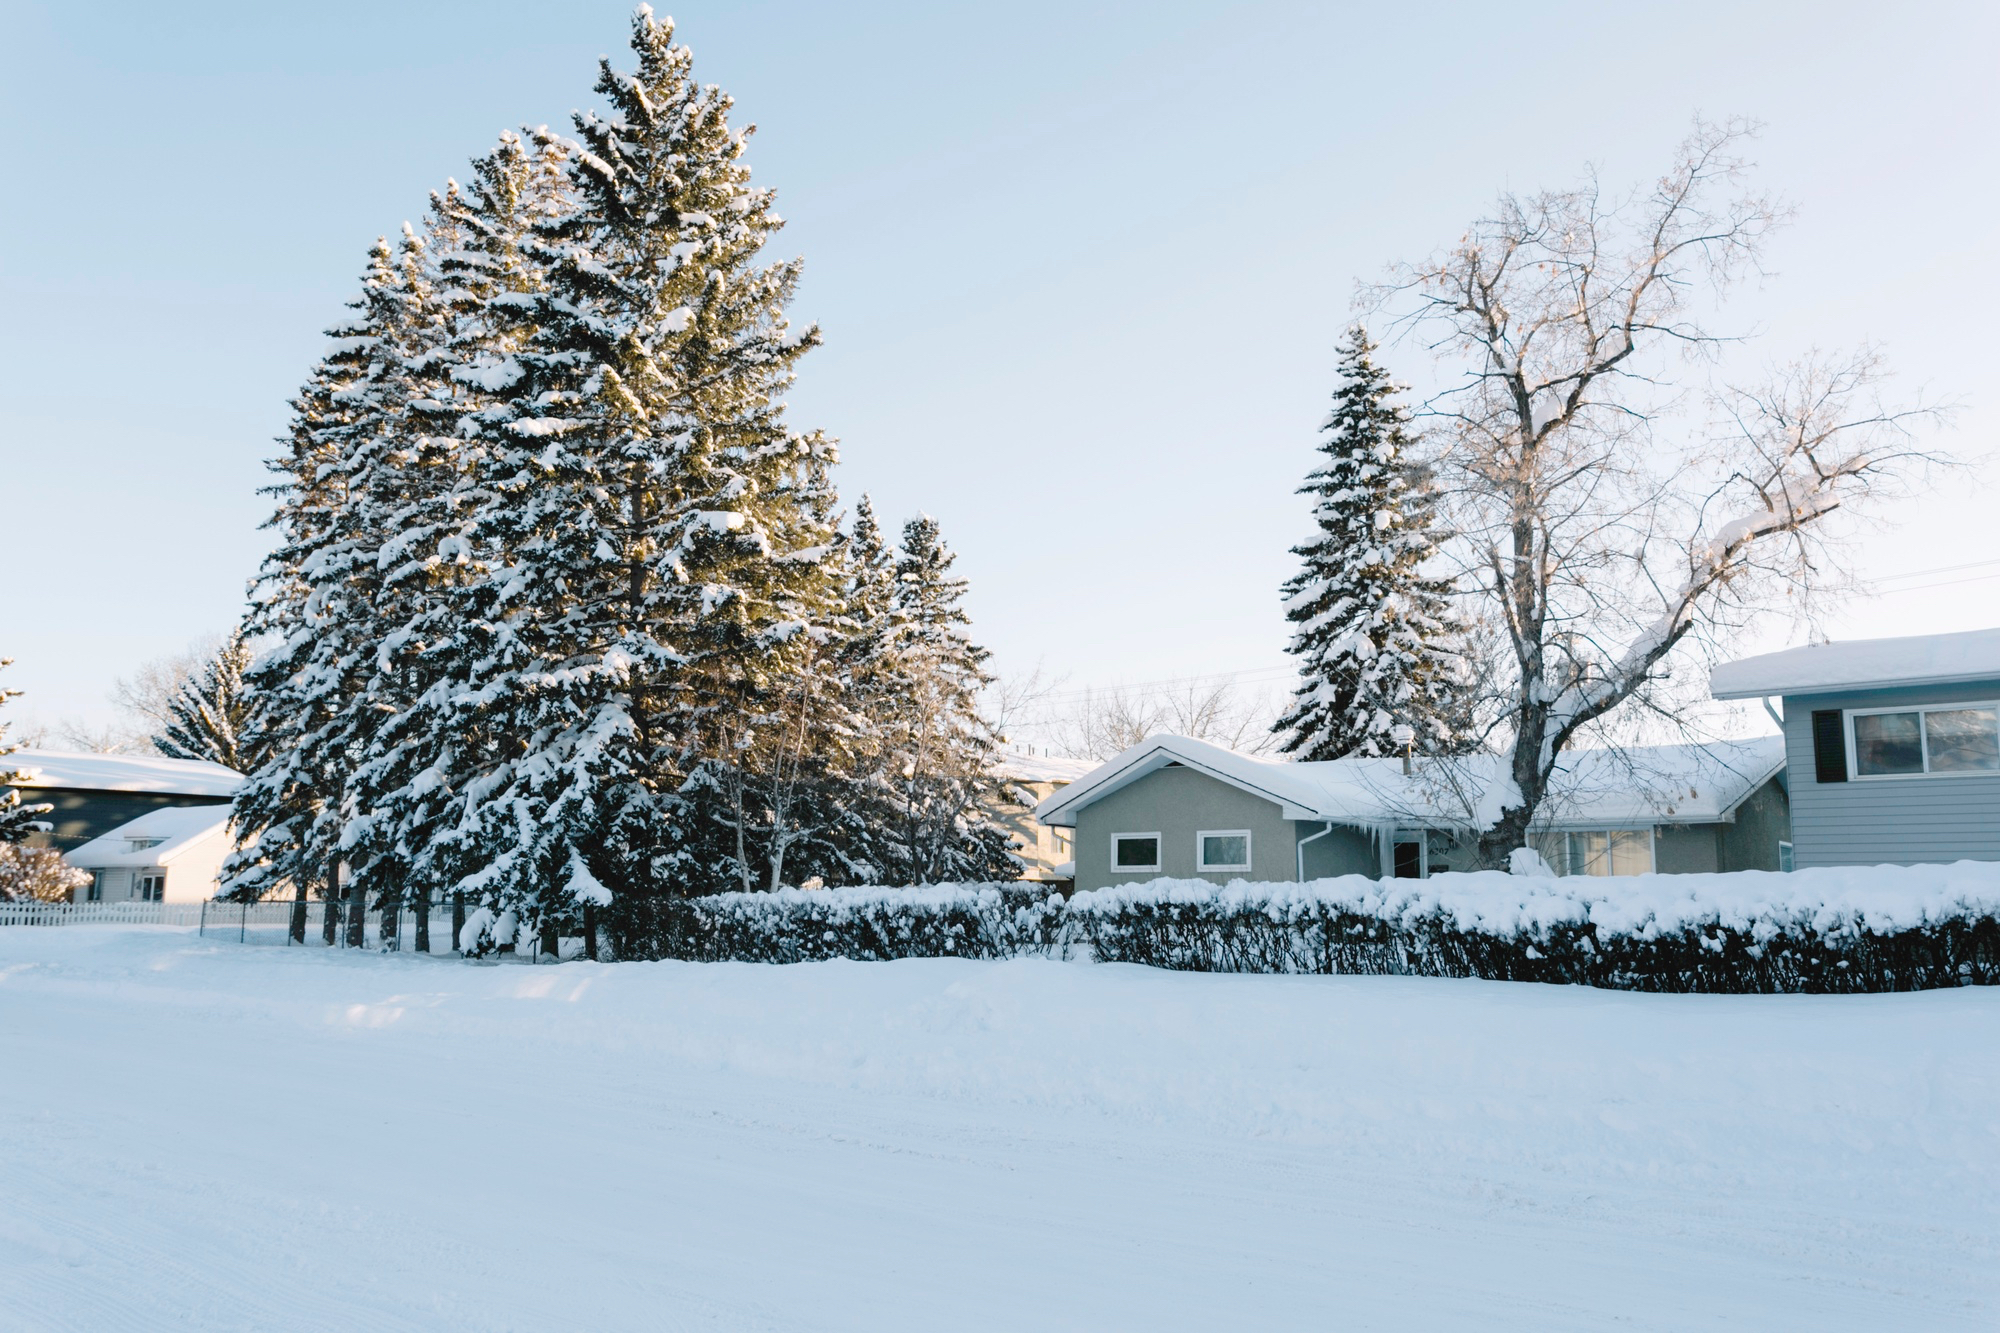 houses-with-pine-trees-in-winter.jpg